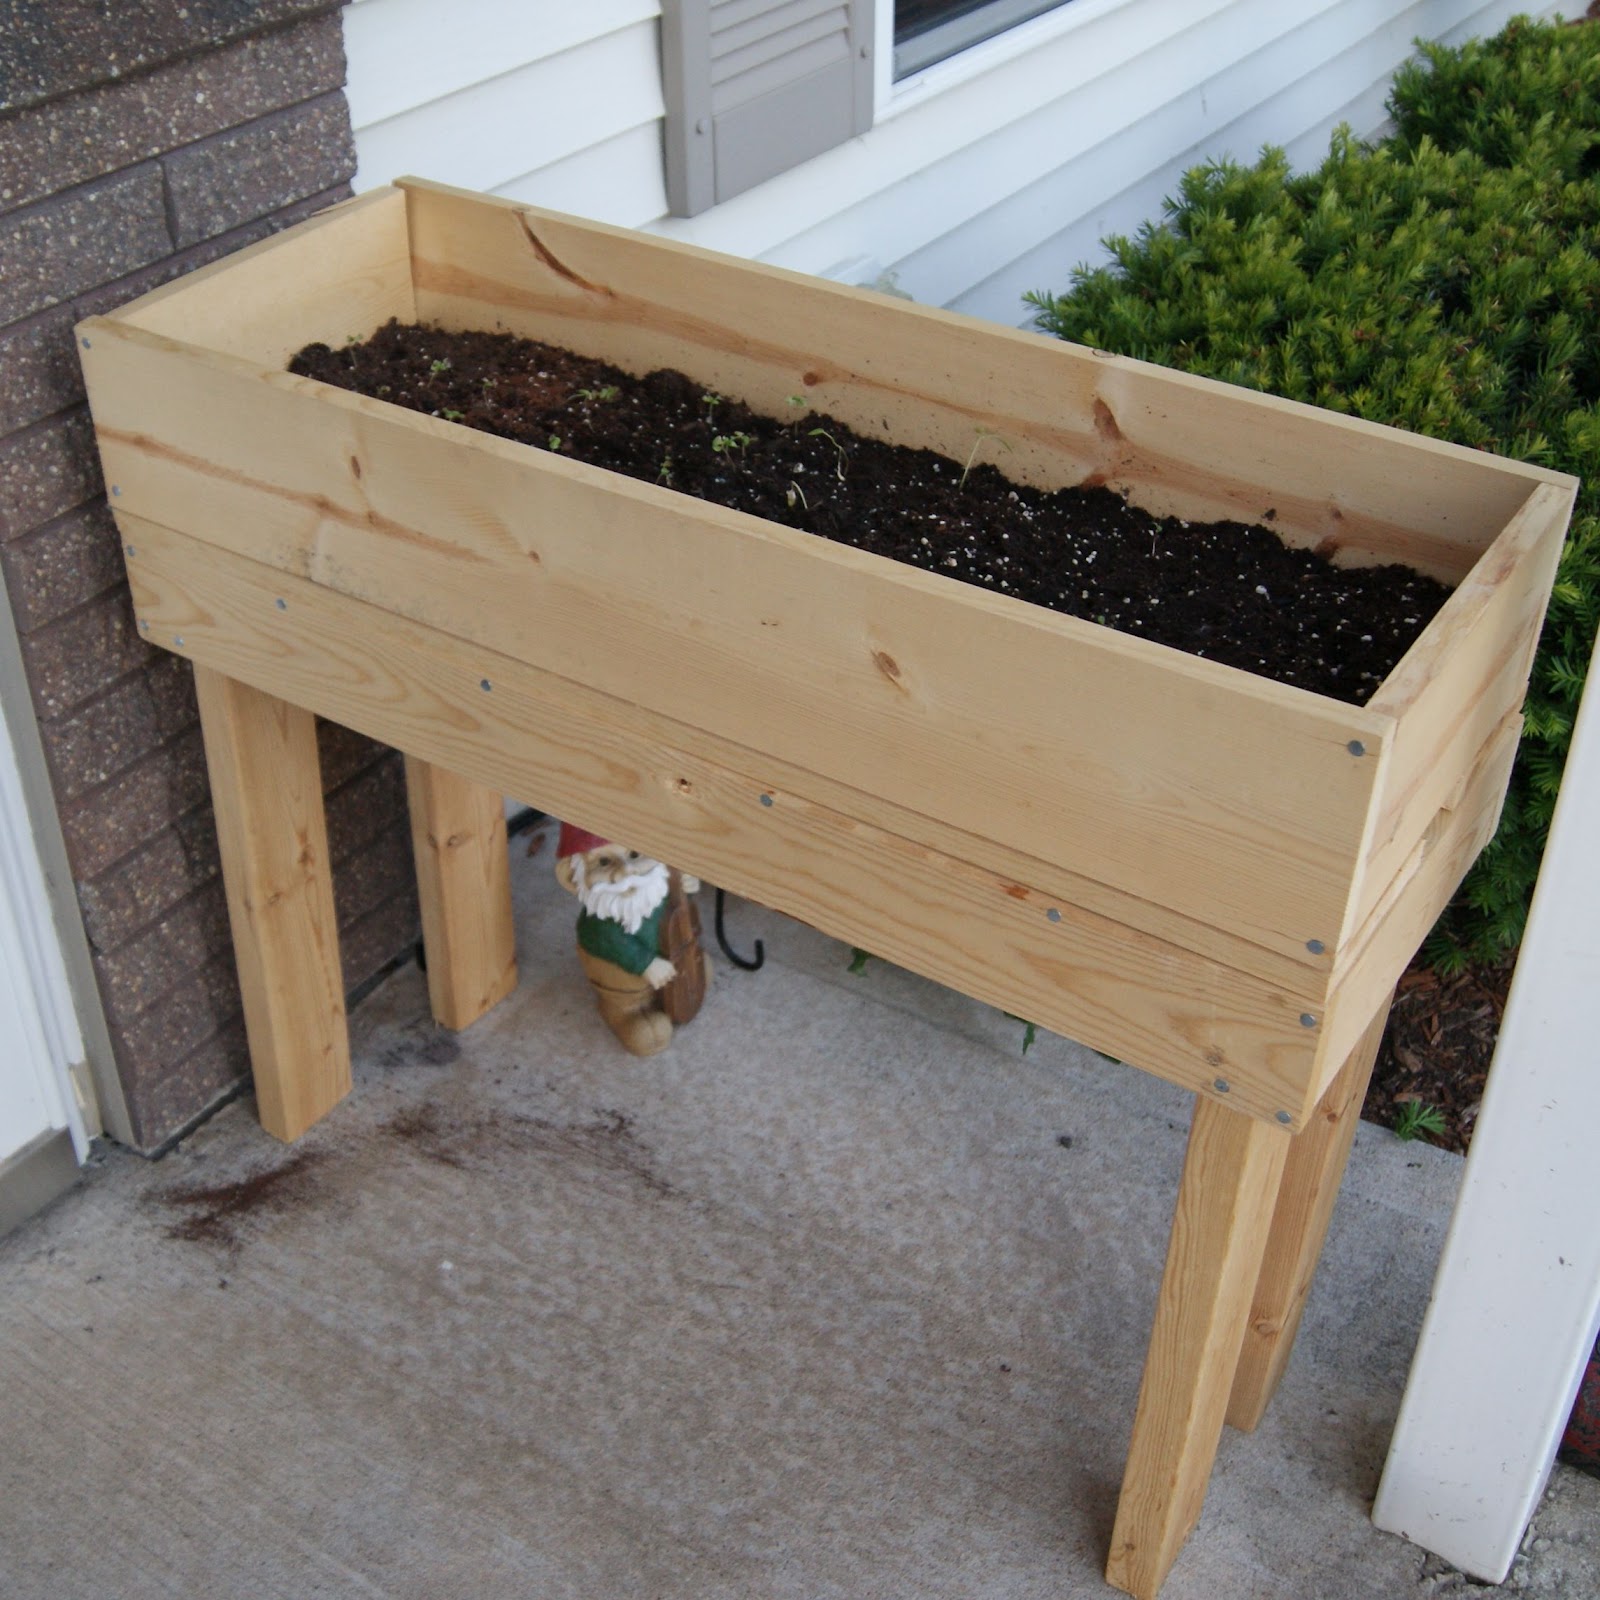 Woodworking how to make wooden planter boxes PDF Free Download